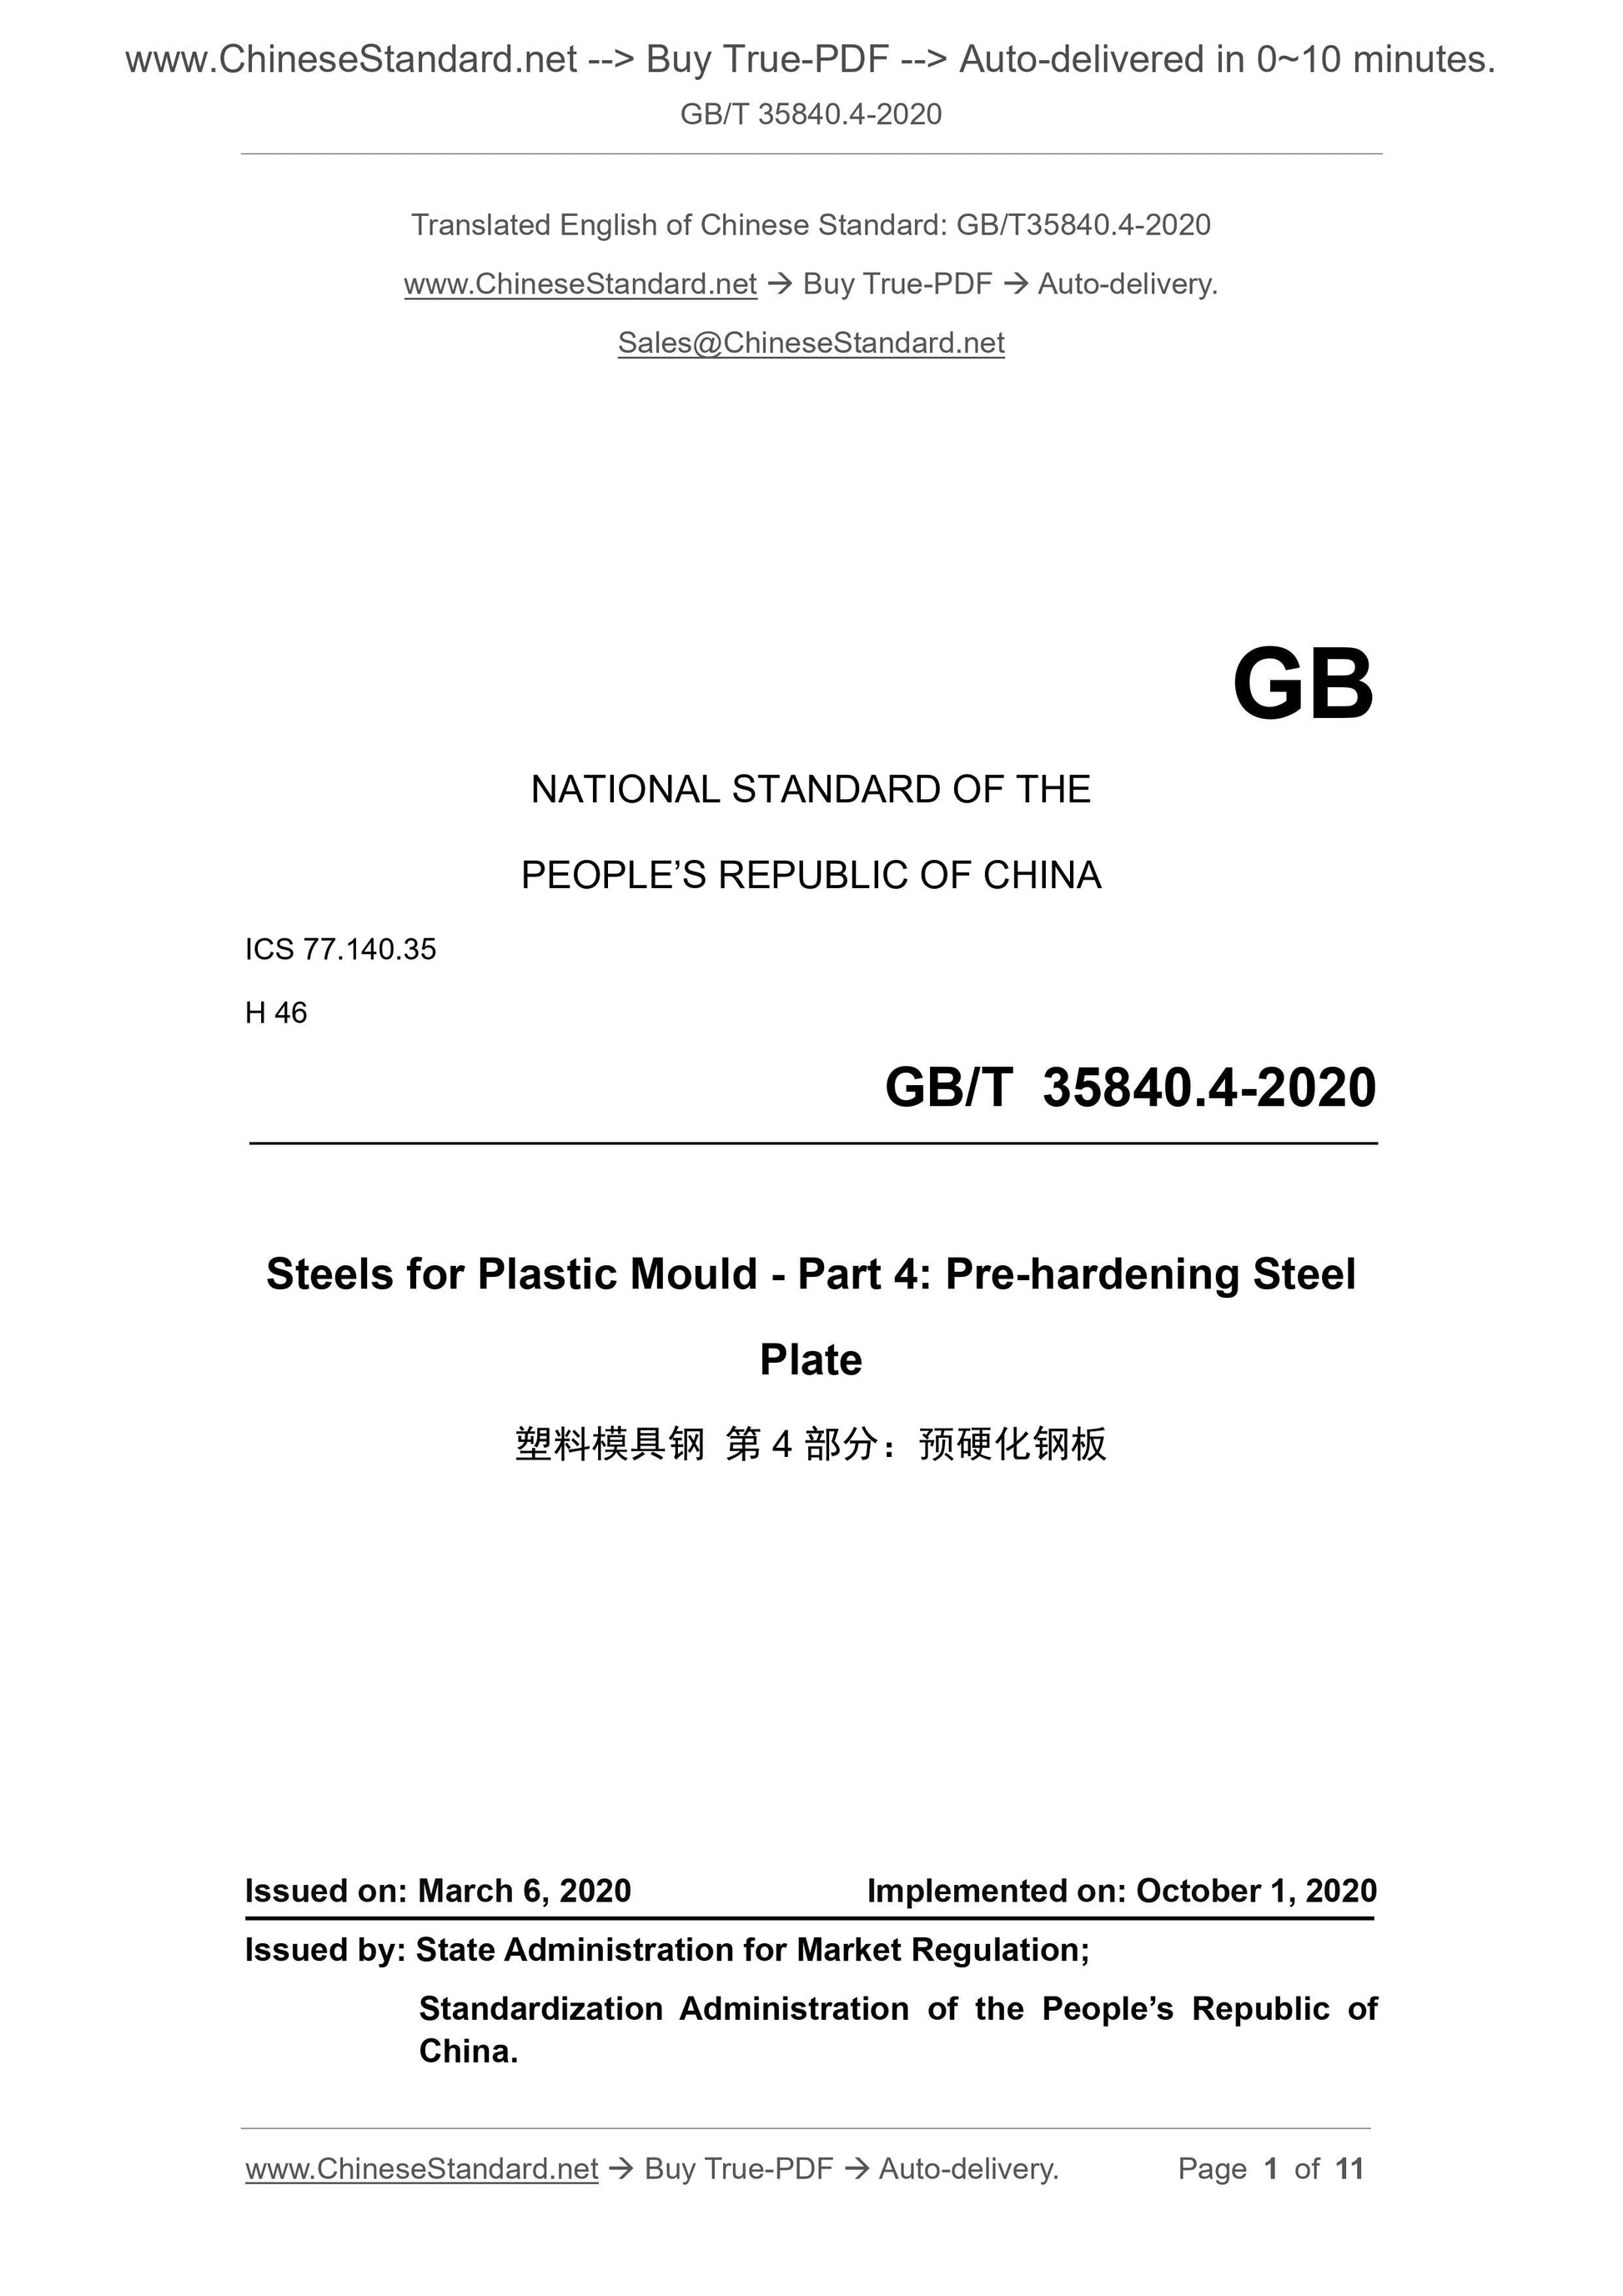 GB/T 35840.4-2020 Page 1